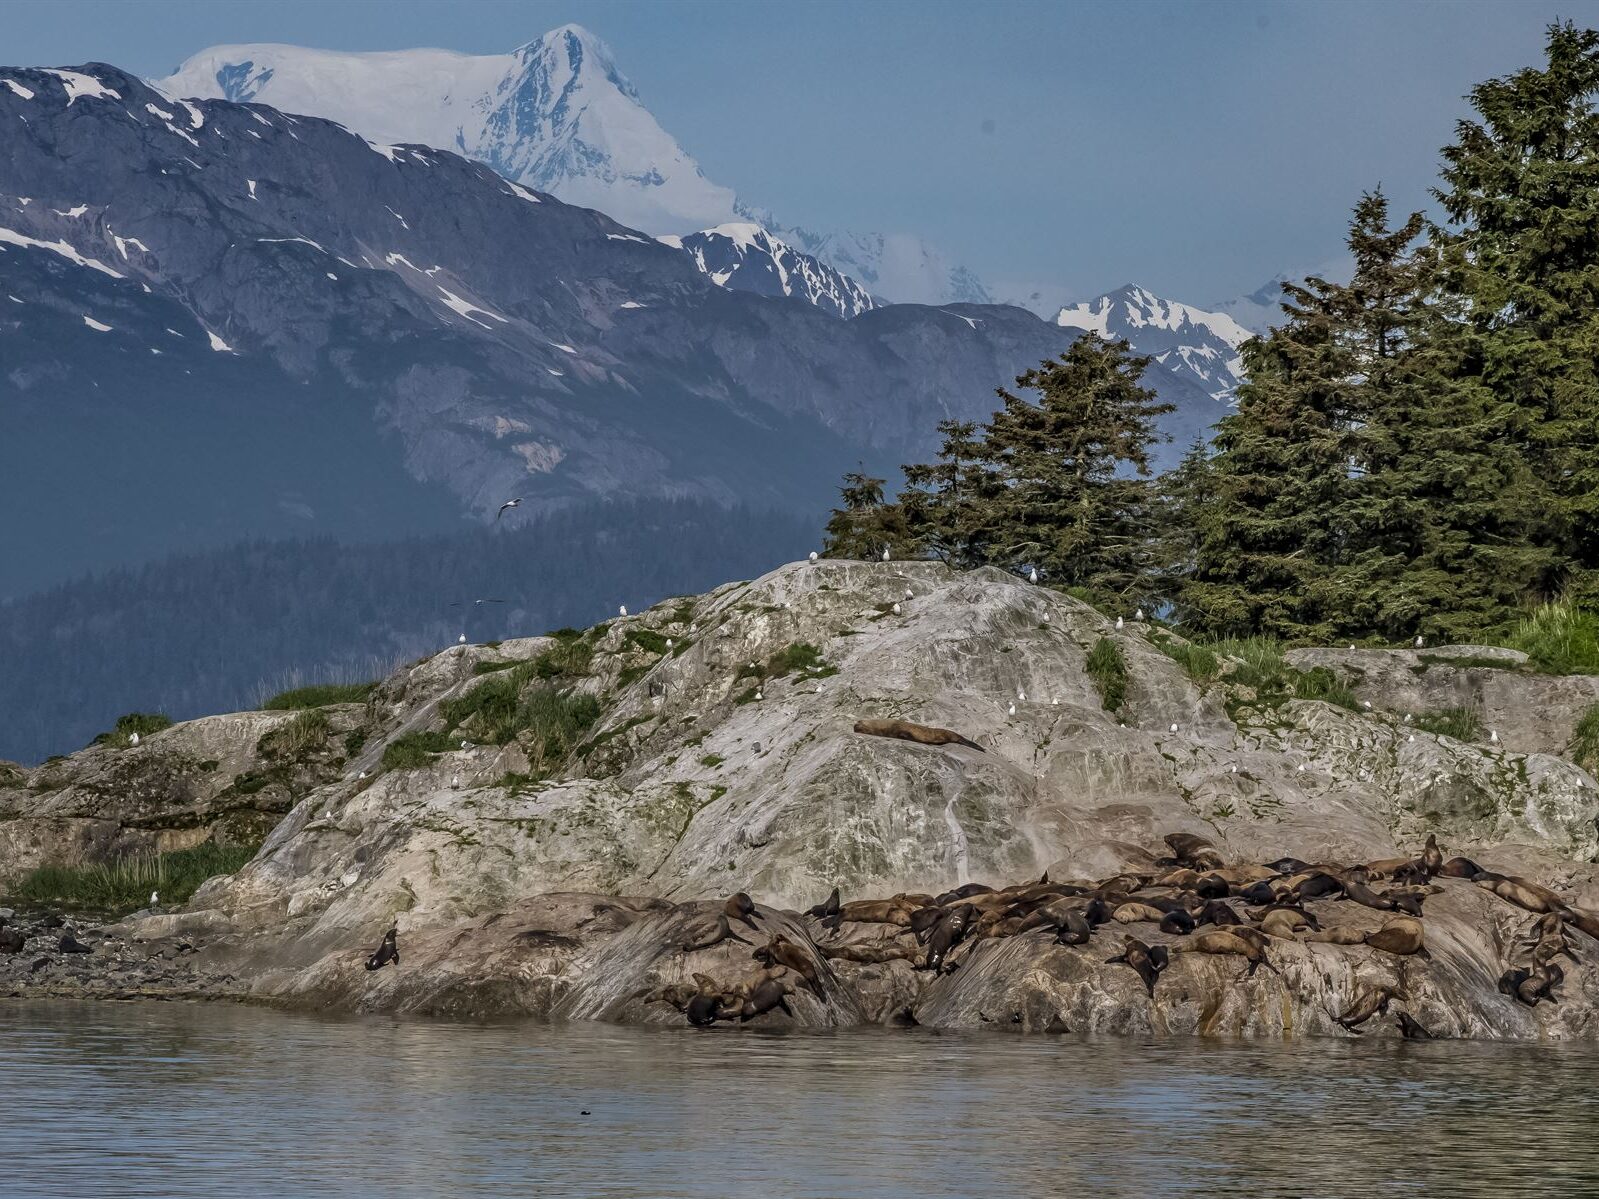 Birds nesting on the rocky shoreline of Alaska with views of rolling forests and mountains to snow-capped peaks in the background